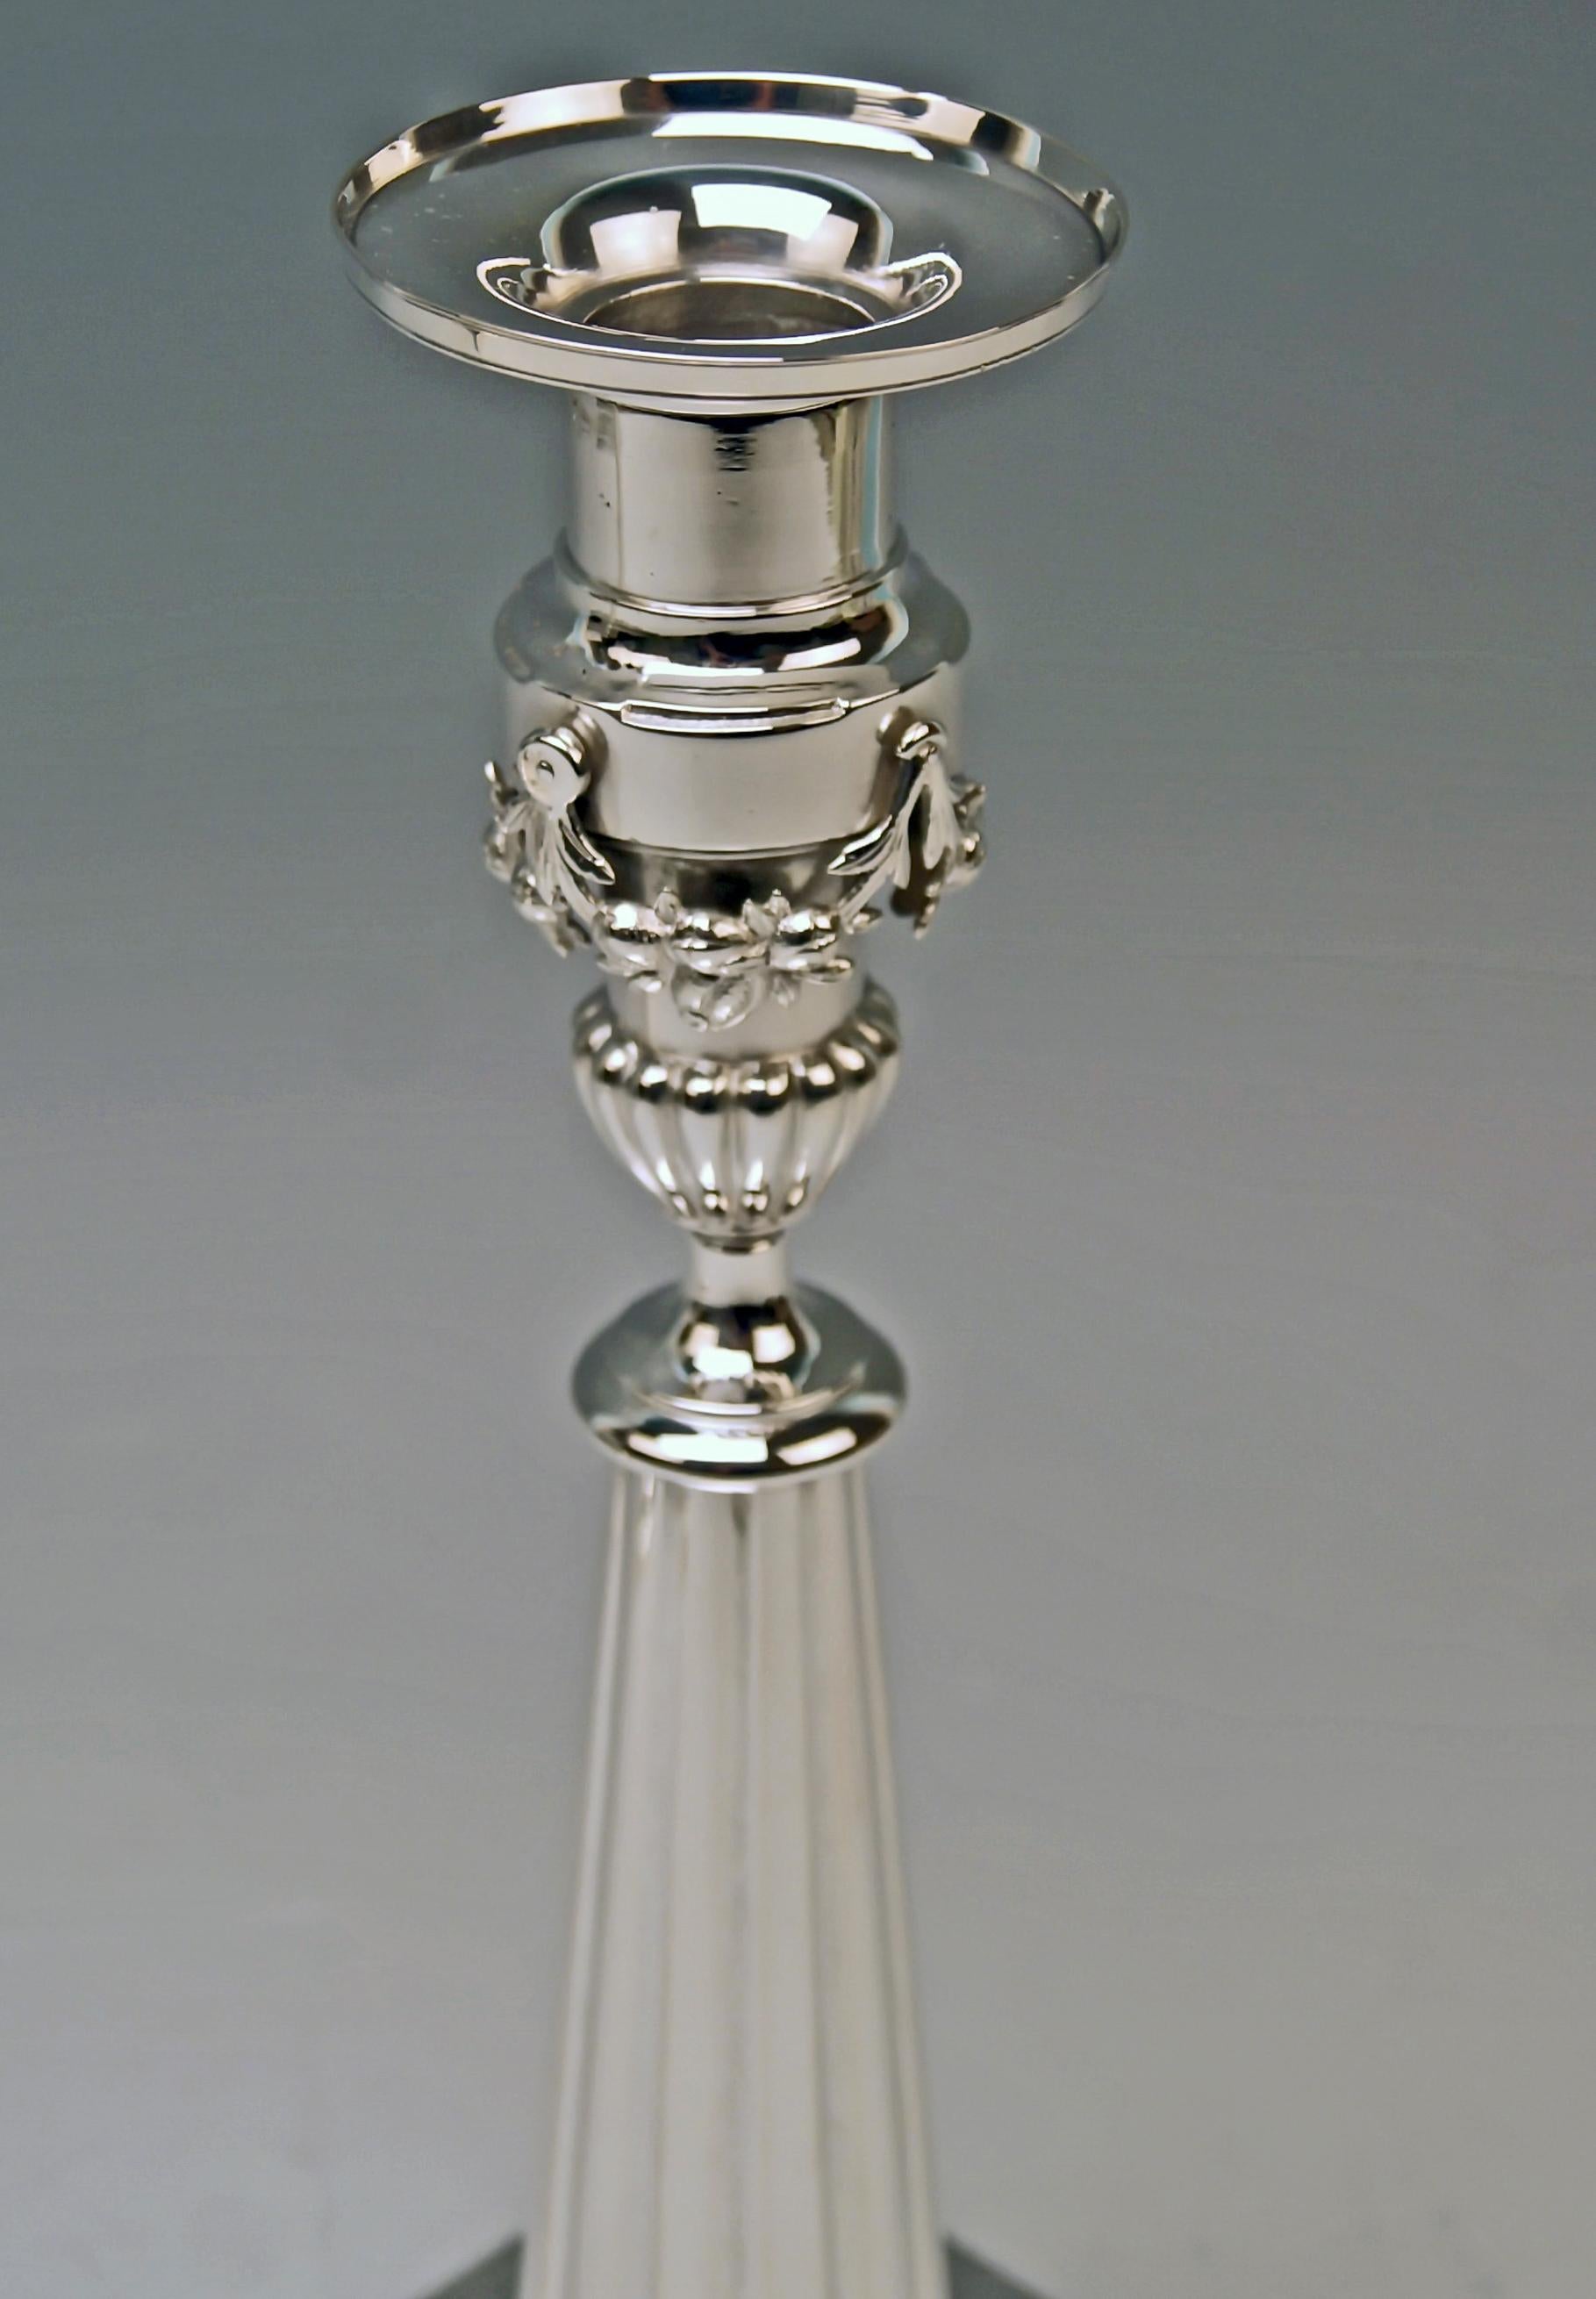 Empire Silver Pair of Candlesticks Period of Classizism Augsburg Germany Haller For Sale